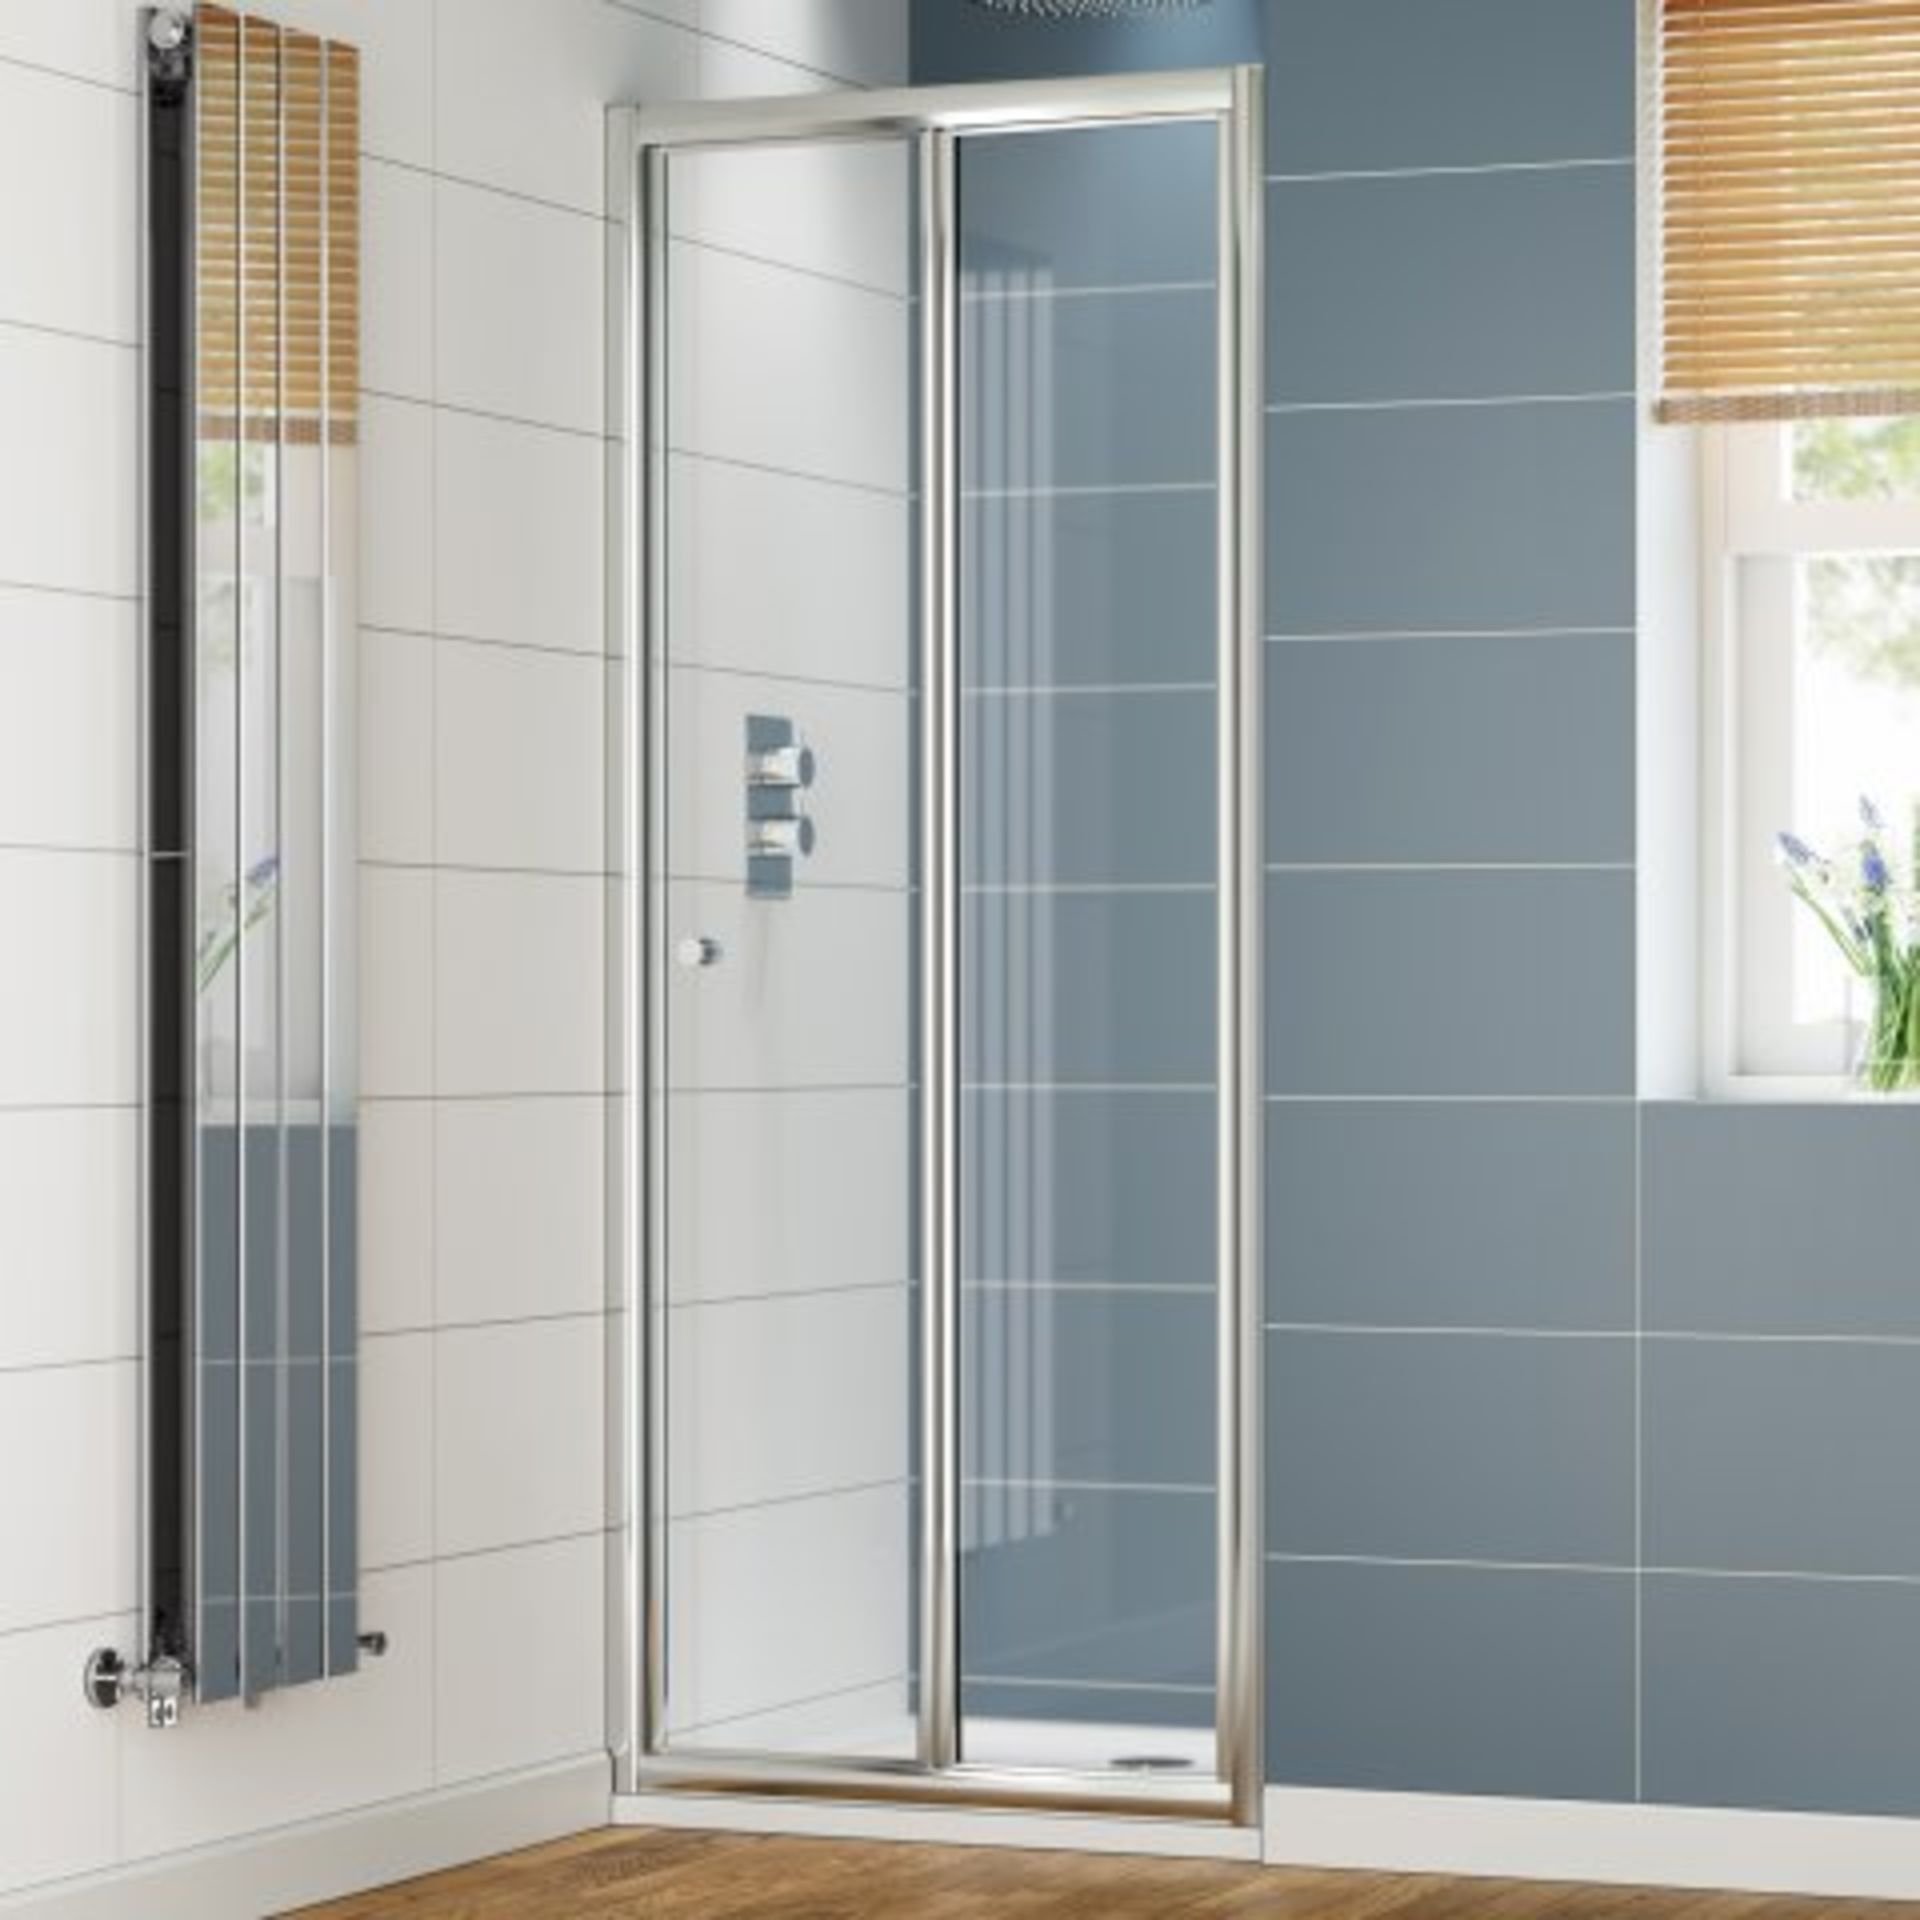 (A520) 1200mm - Elements Sliding Shower Door. RRP £299.99. Designed and crafted to improve the decor